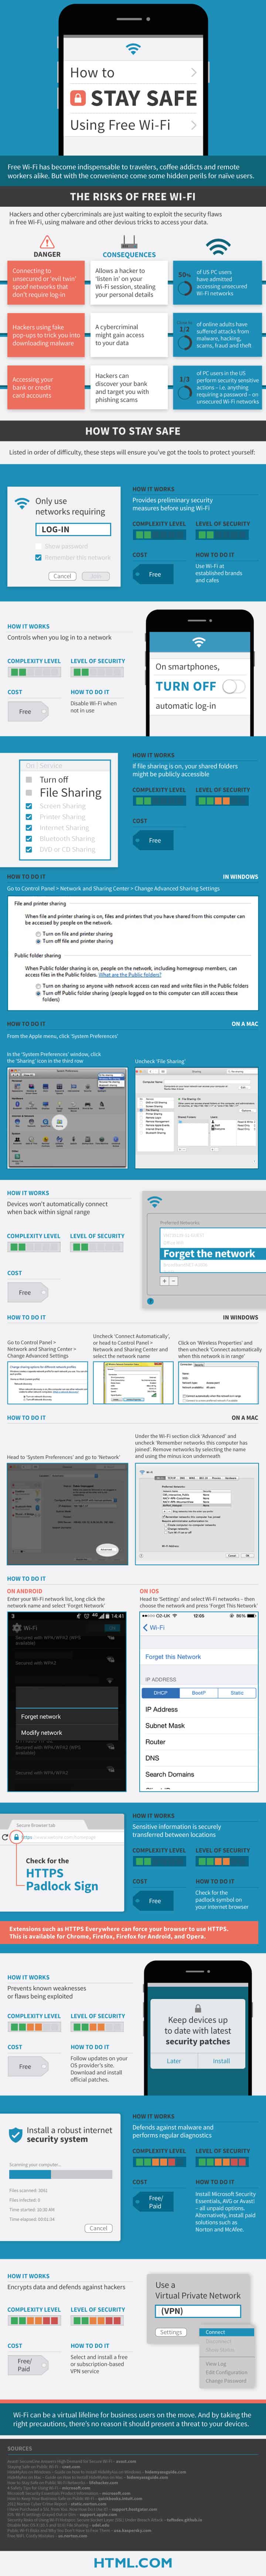 Stay safe using free wifi infographic